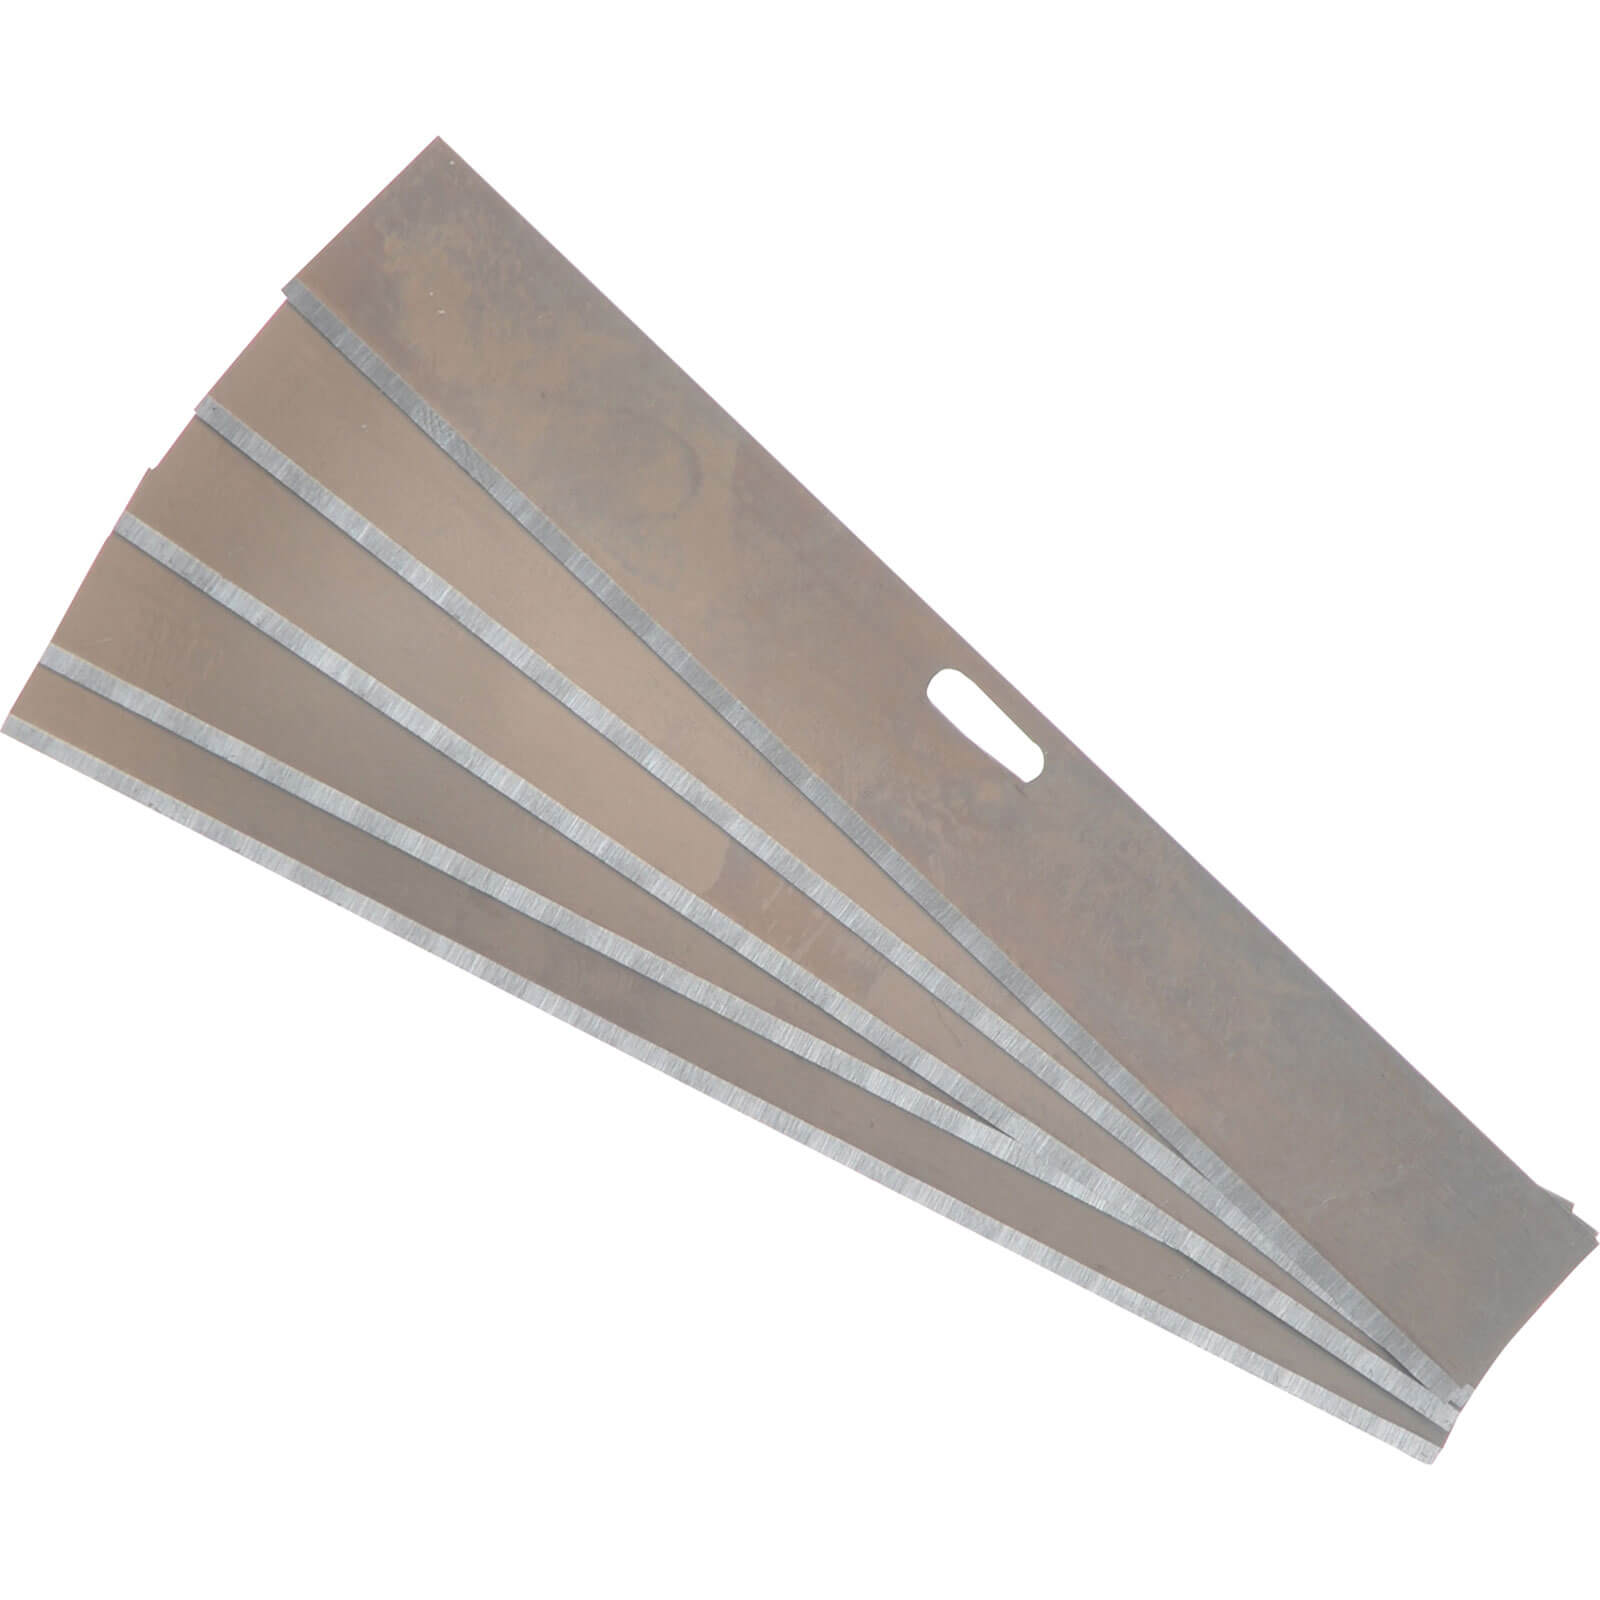 Image of Vitrex Replacement Blades for TAS100 Tile Adhesive Scraper